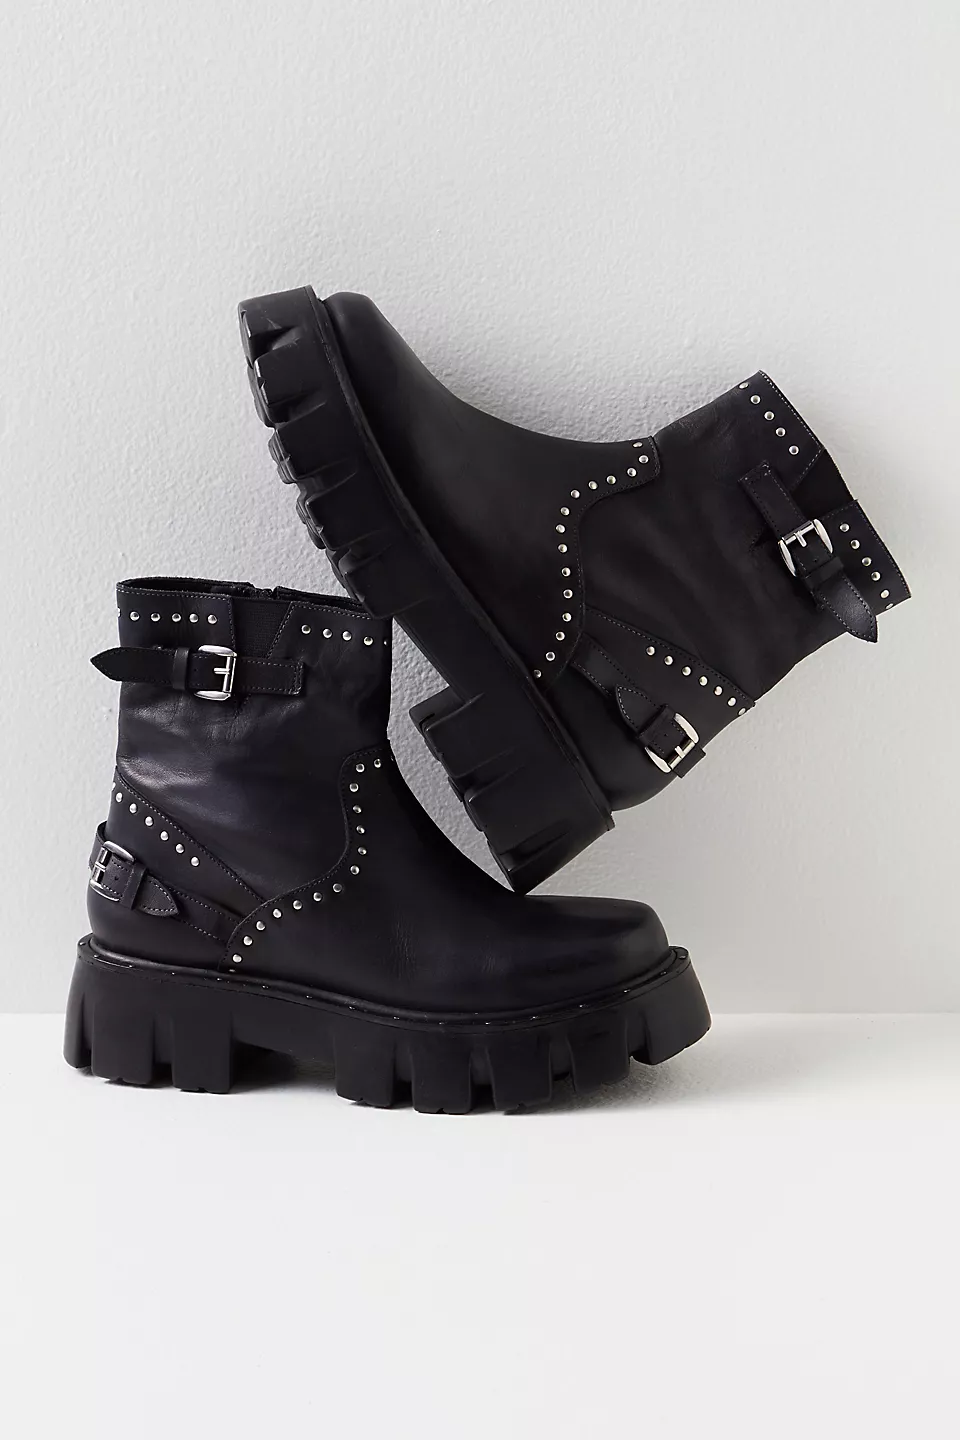 Free People ludlow studded moto black boots